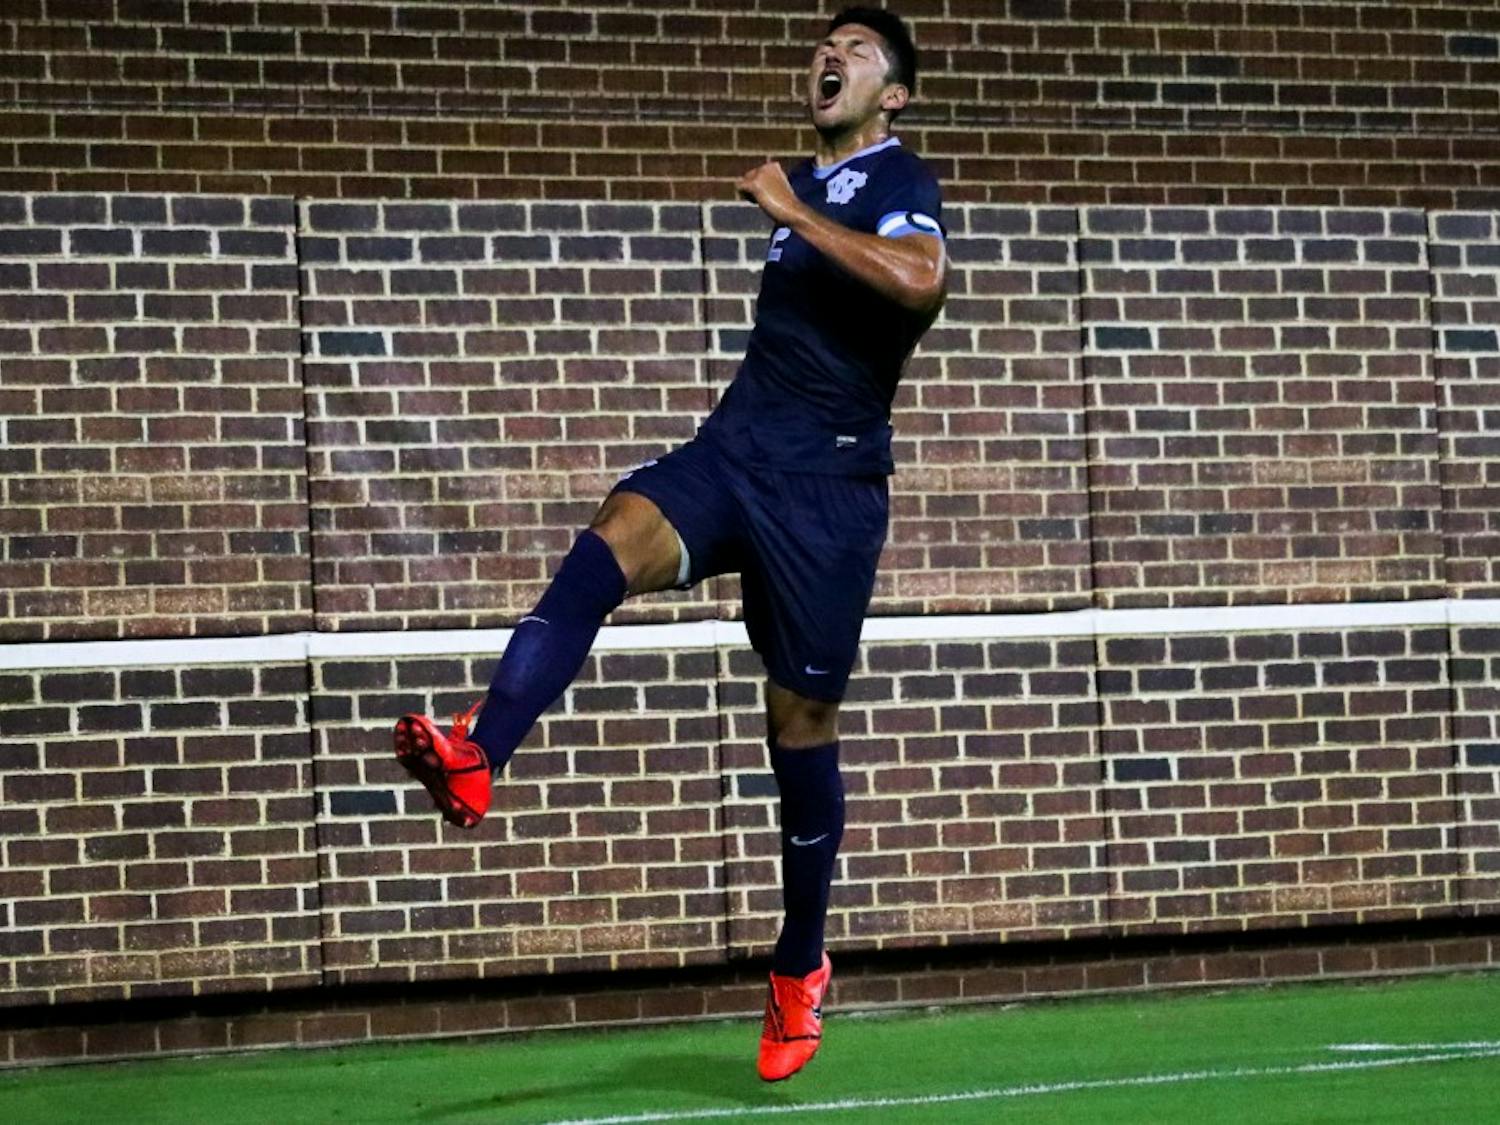 Senior midfielder Mauricio Pineda (2) celebrates his first goal in the 3-1 win over West Virginia on Tuesday, Oct. 8, 2019 on Dorrance Field.&nbsp;